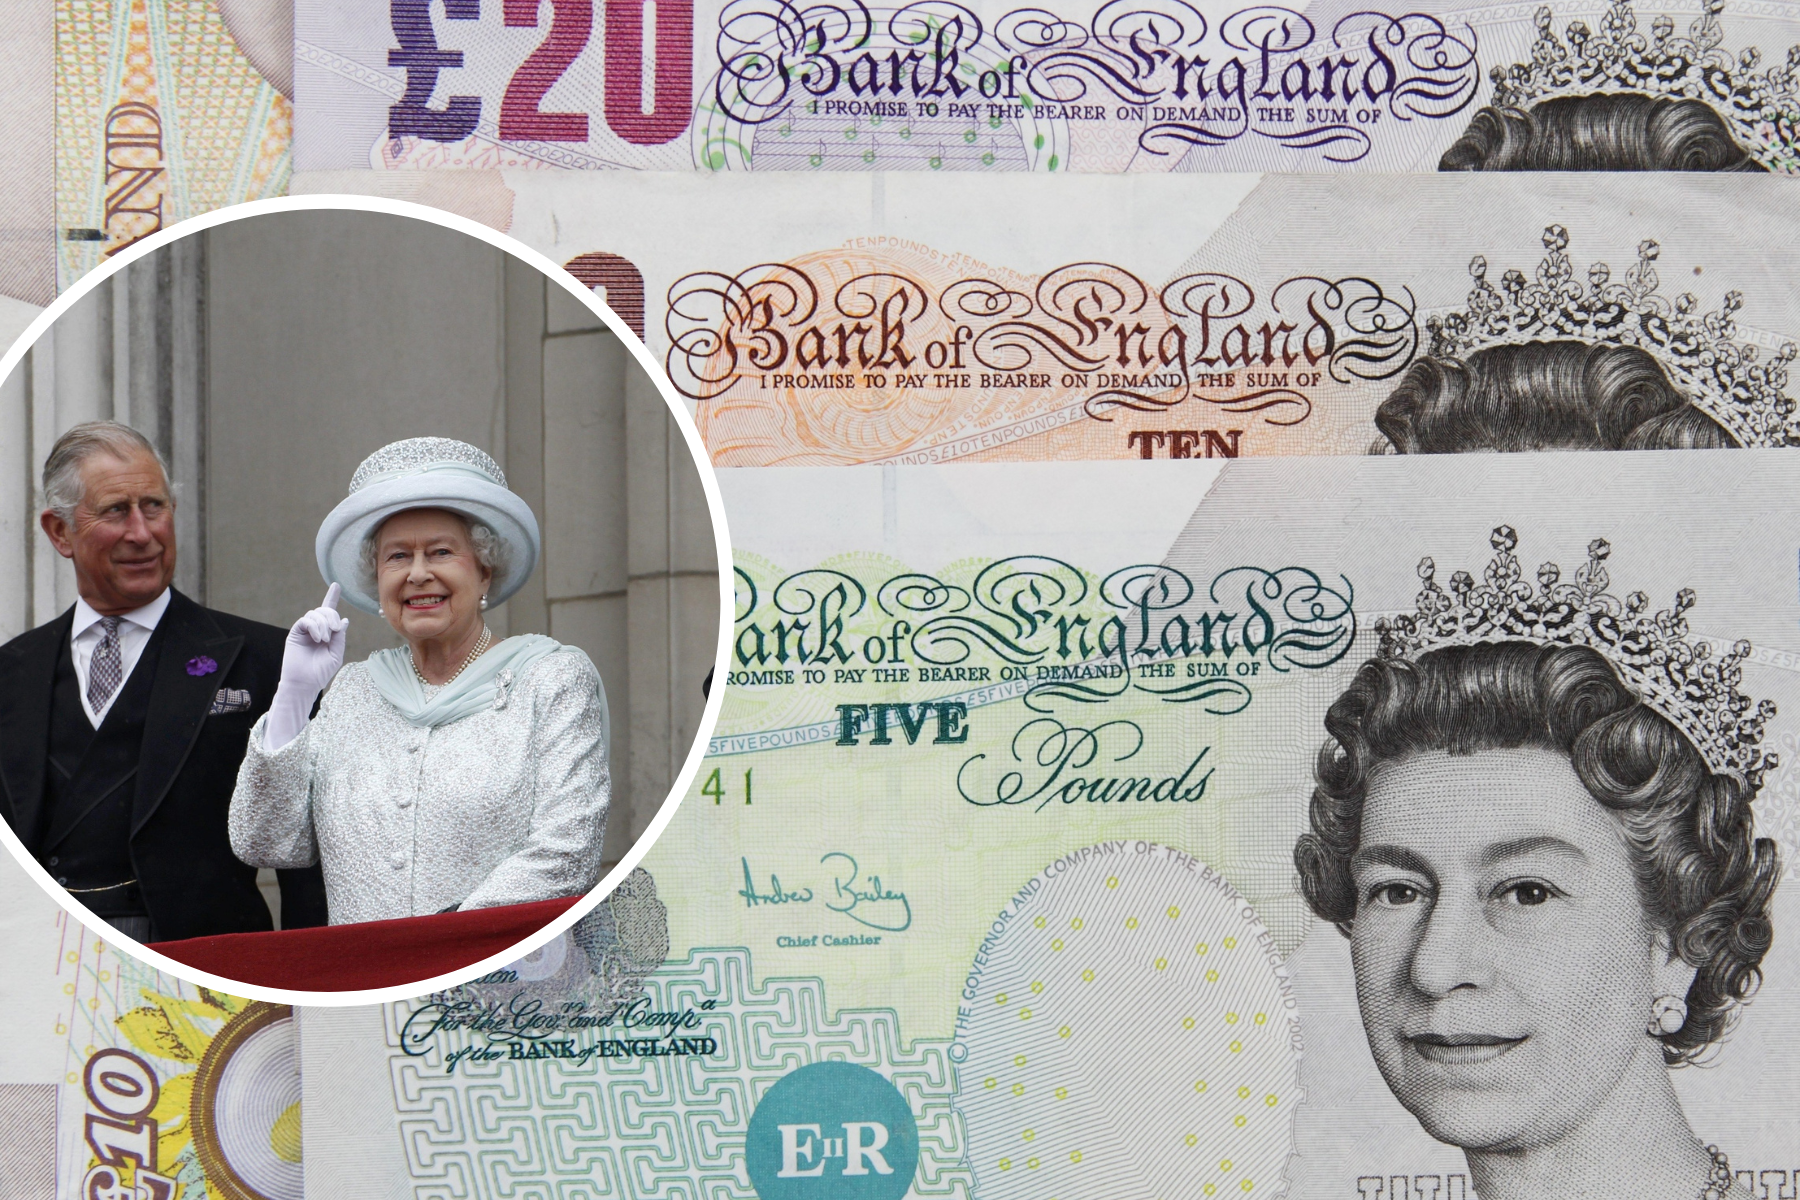 Coins and banknotes of Queen Elizabeth II and King Charles III will co-circulate